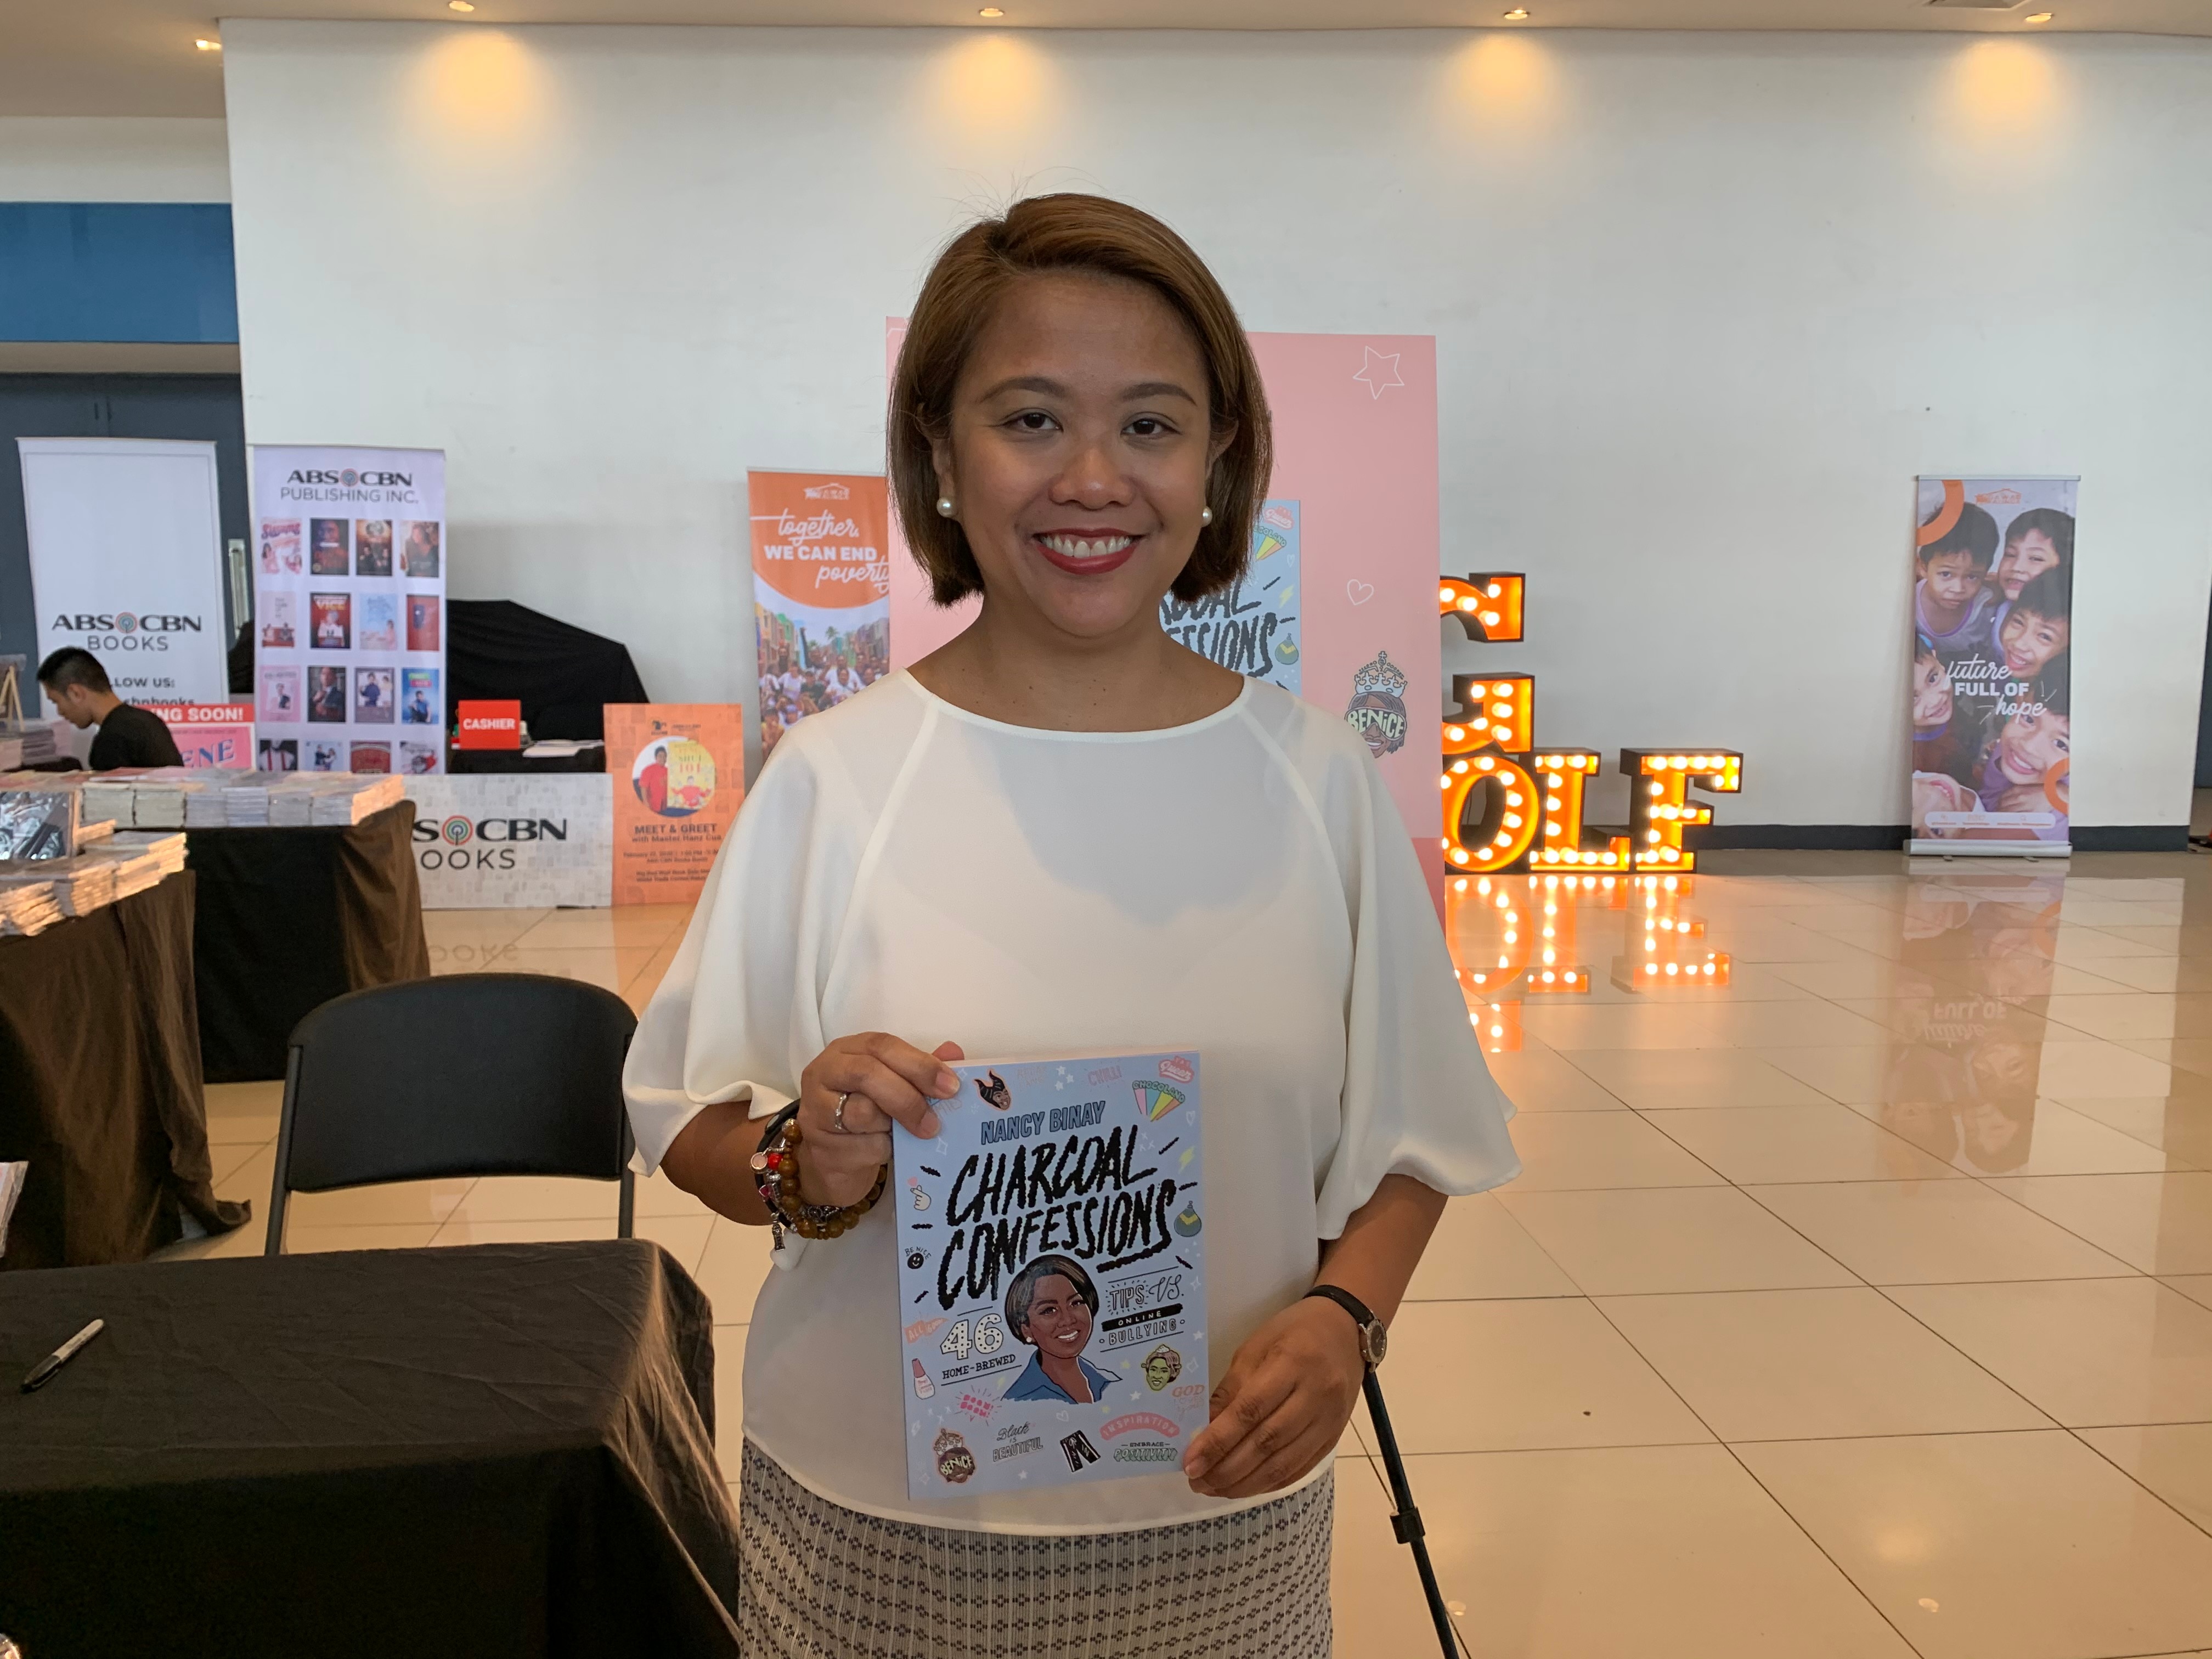 Sen. Nancy Binay pens cyberbullying experience in "Charcoal Confessions" book